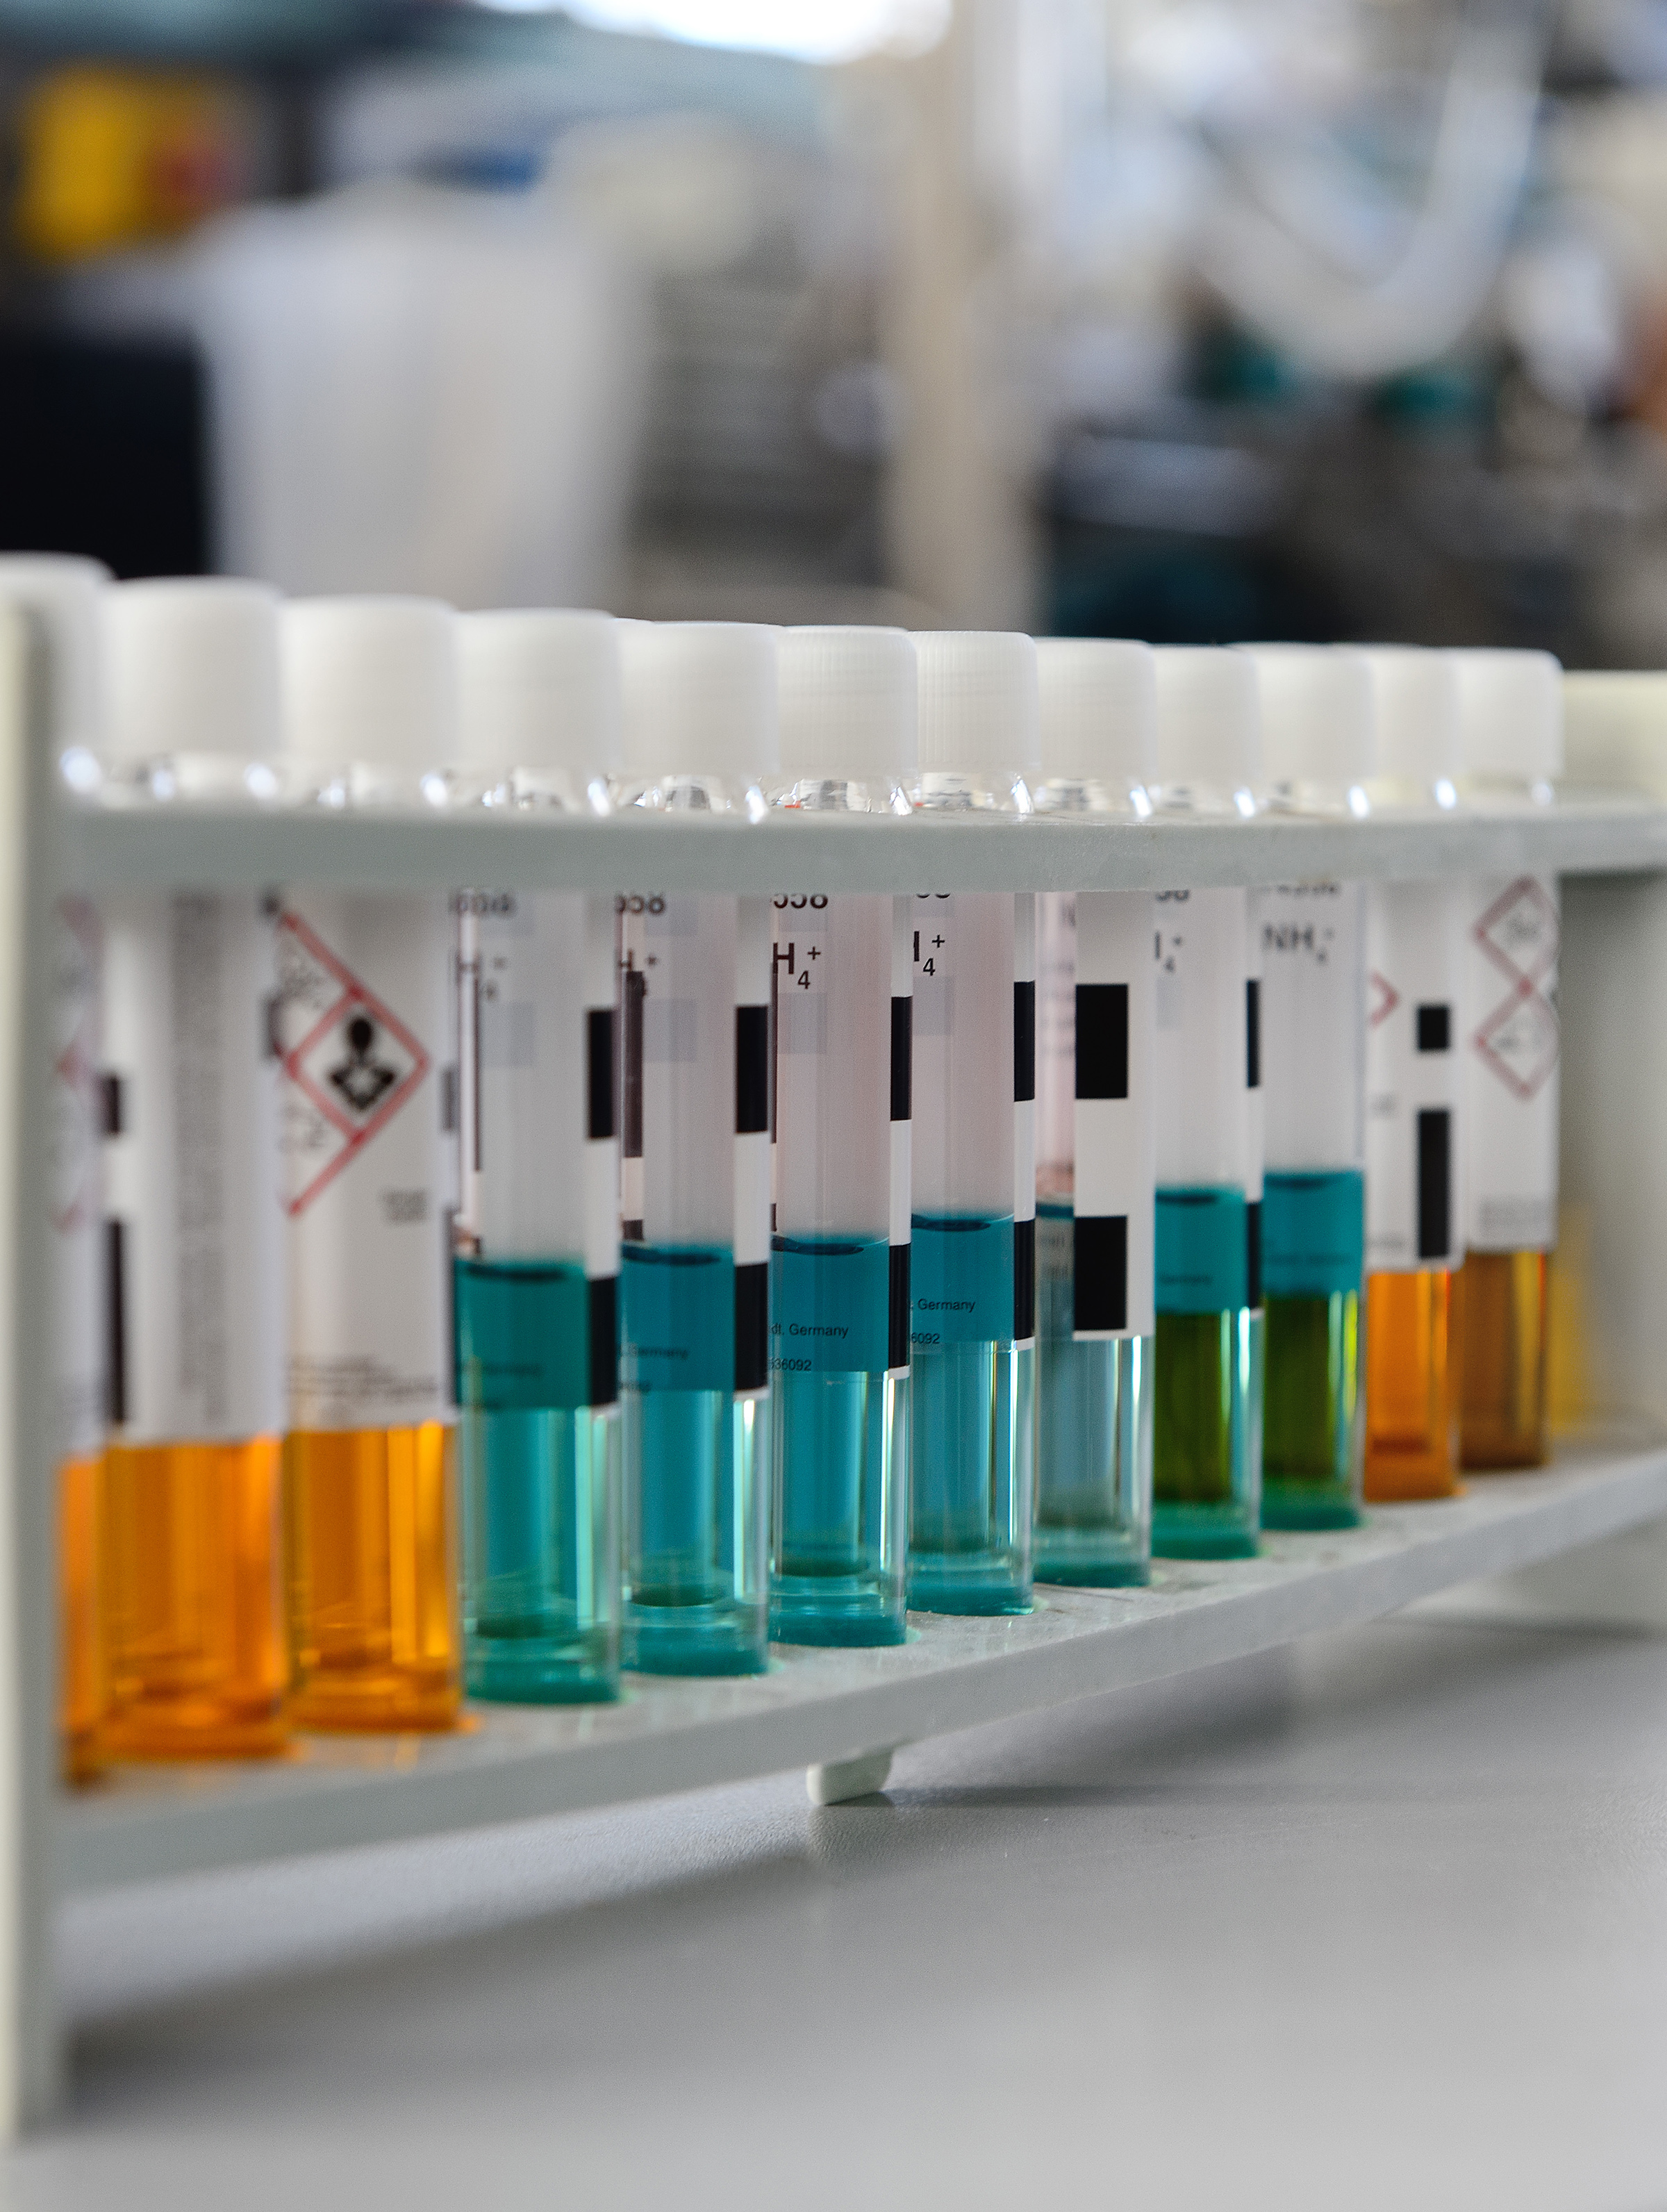 Close-up view of test tubes filled with different liquids